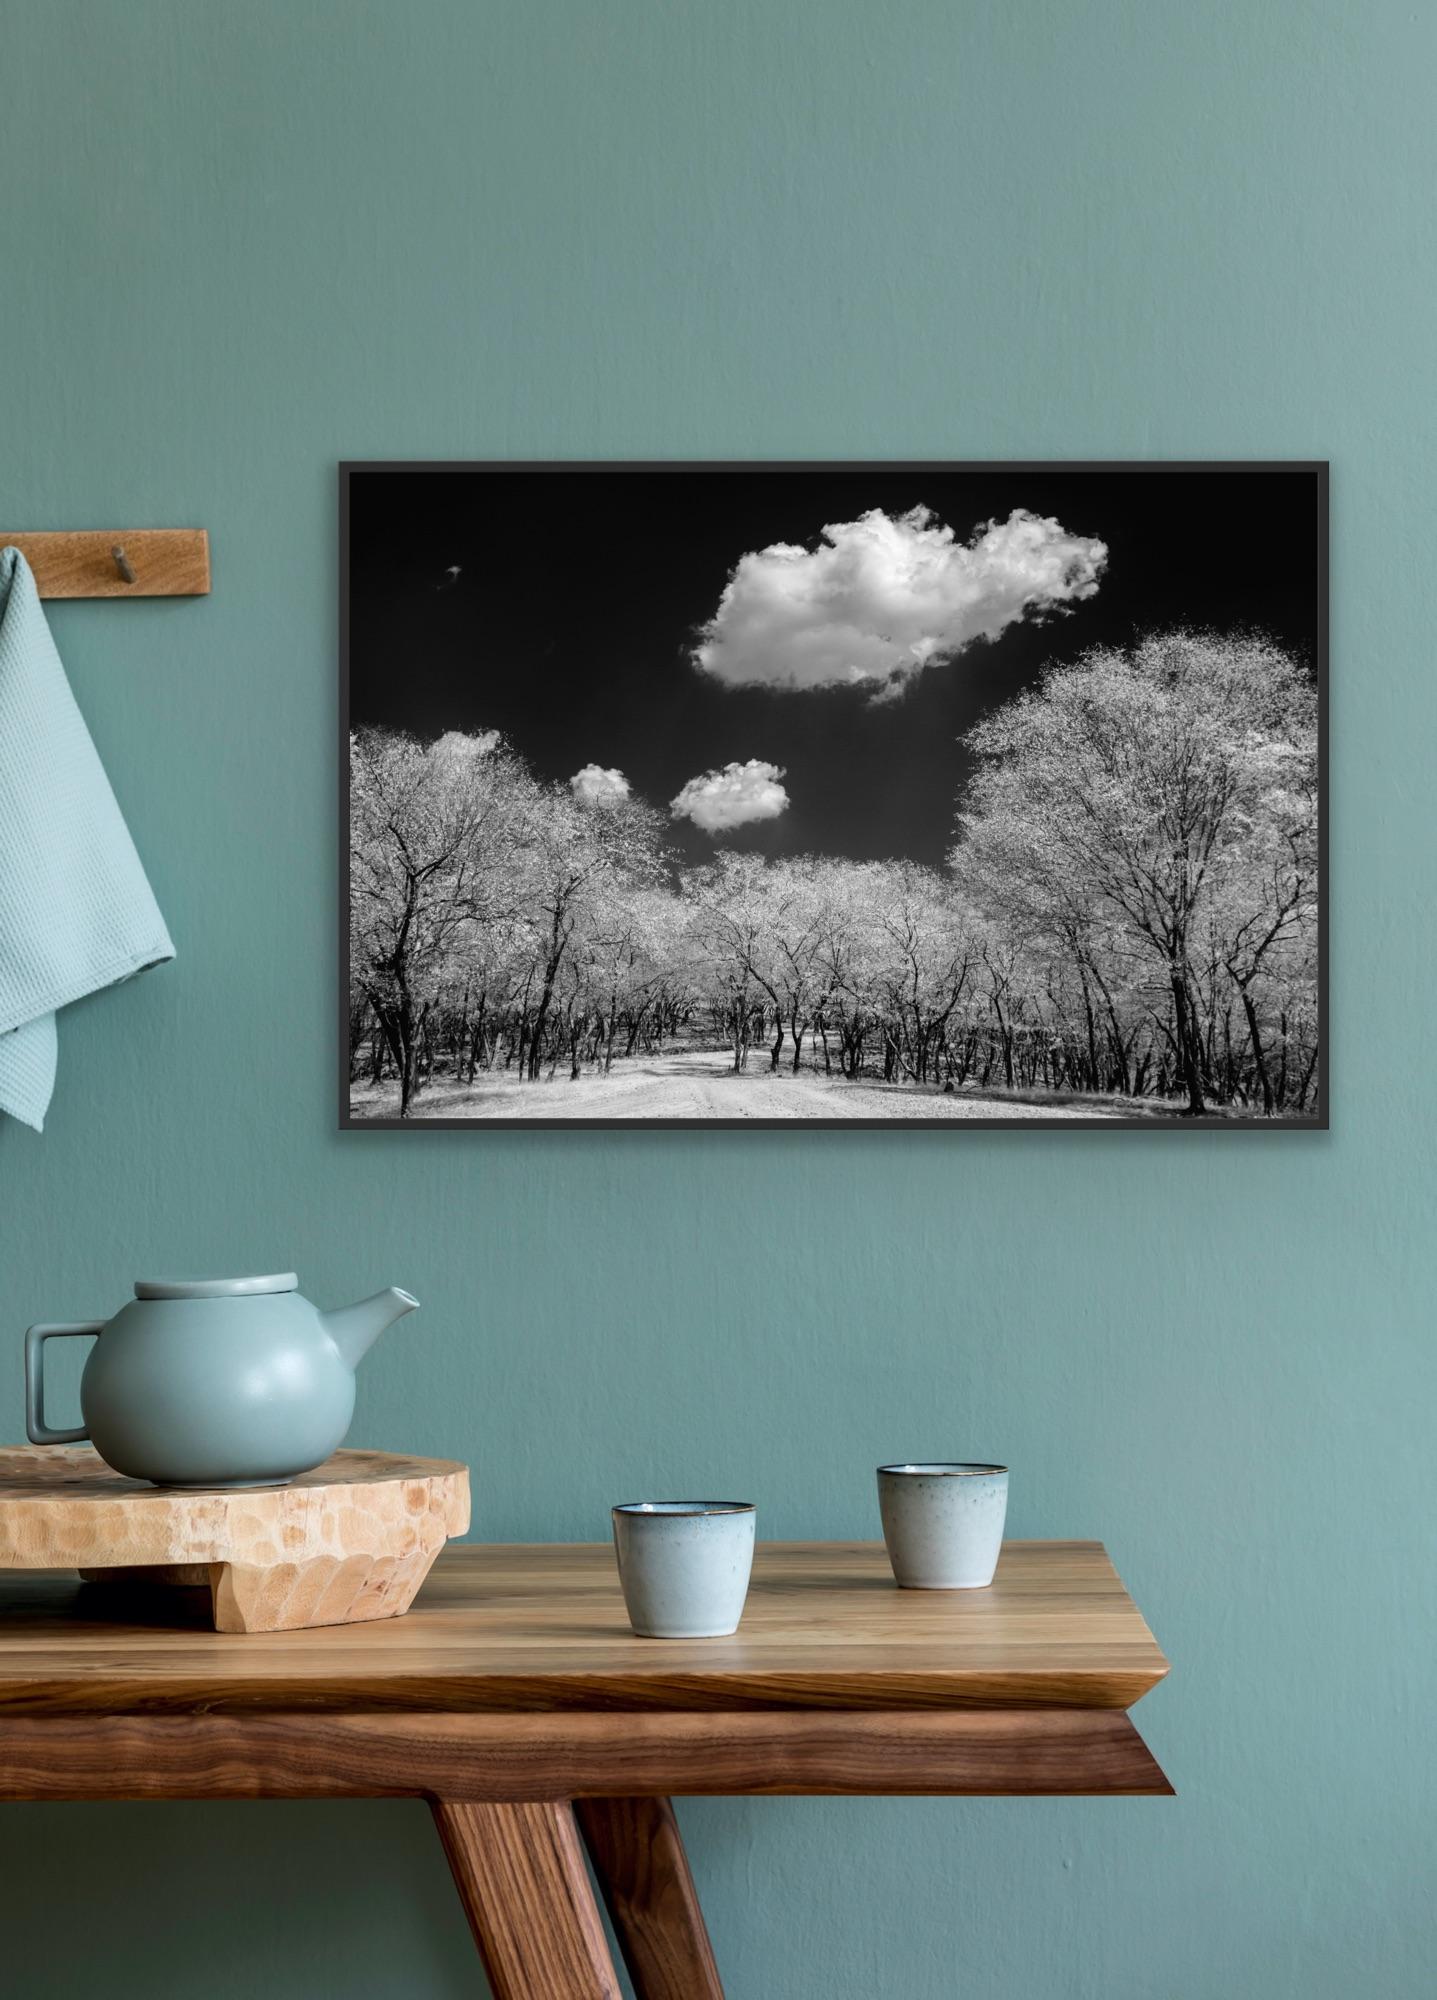 Surreal Black White Landscape Photograph Nature Wildlife India Trees Clouds For Sale 12